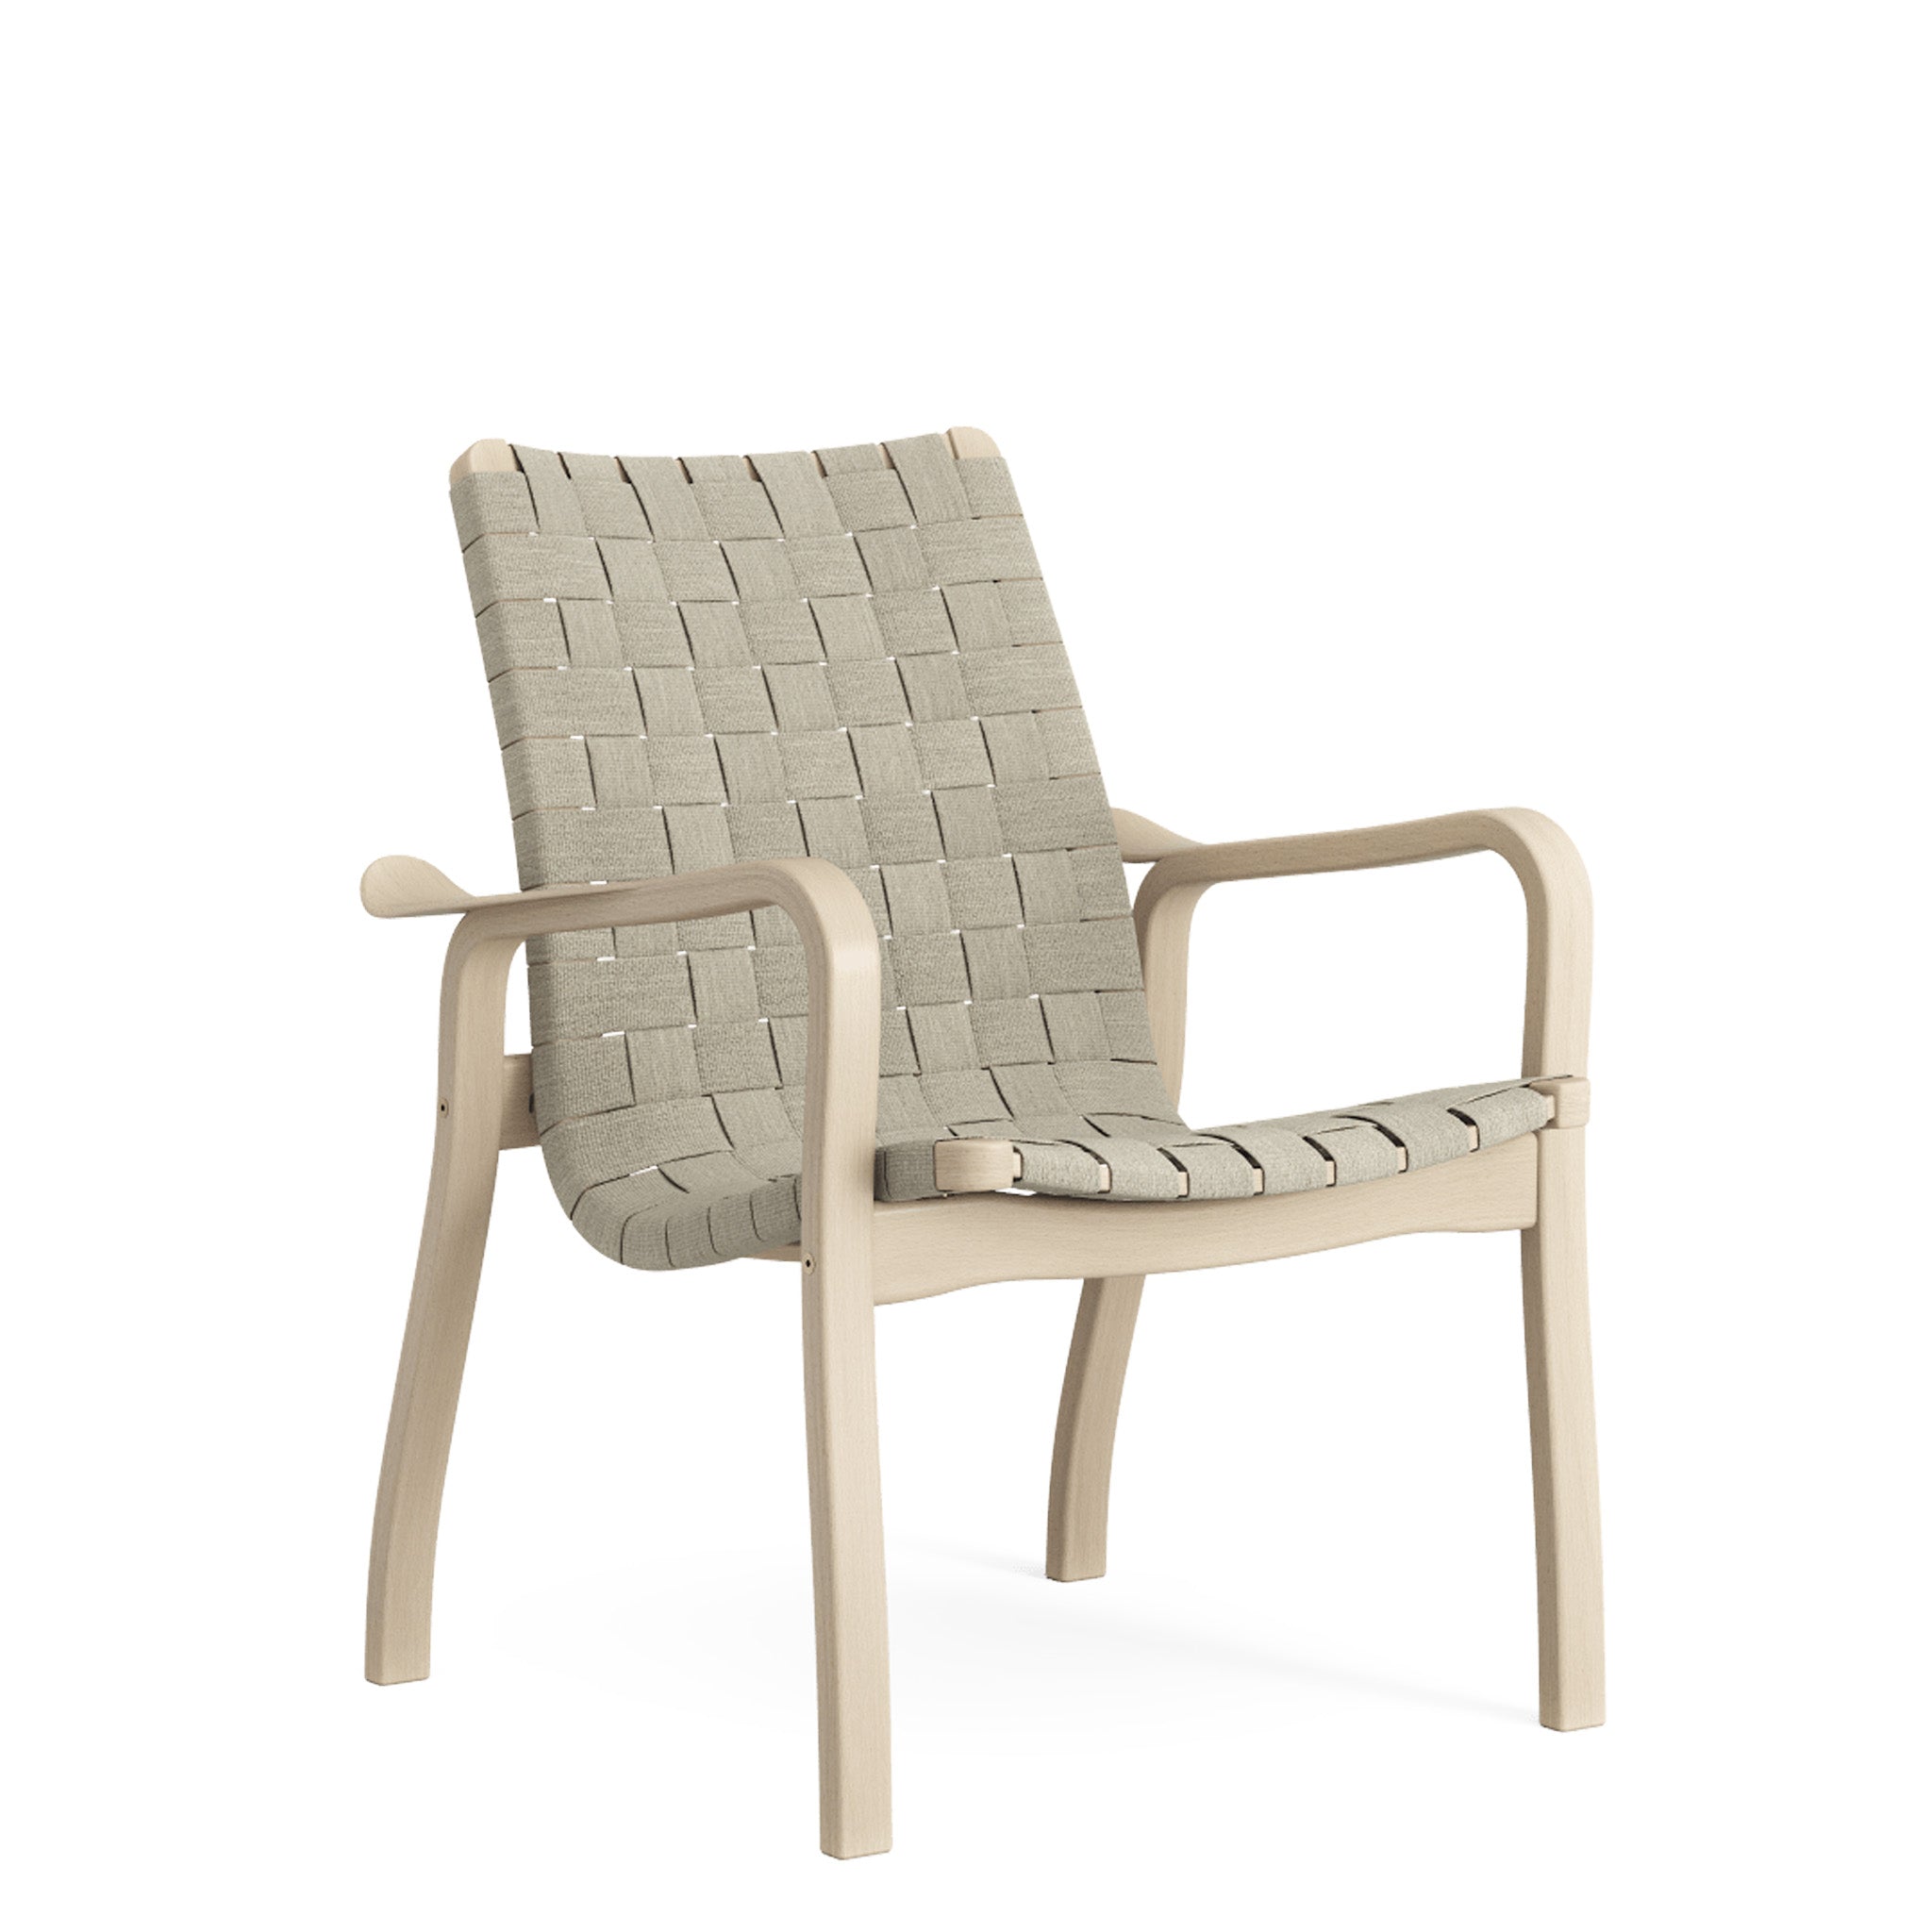 Primo Lounger Low Back by Swedese